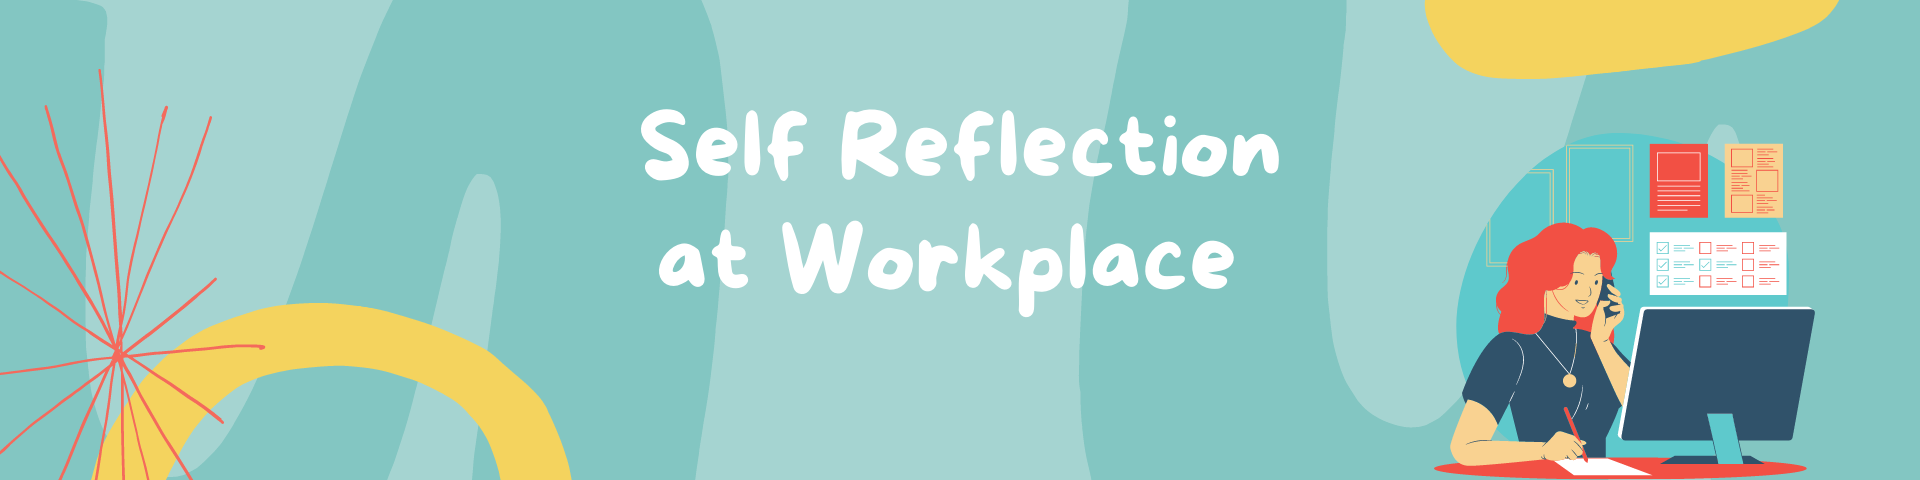 Self Reflection at Workplace 